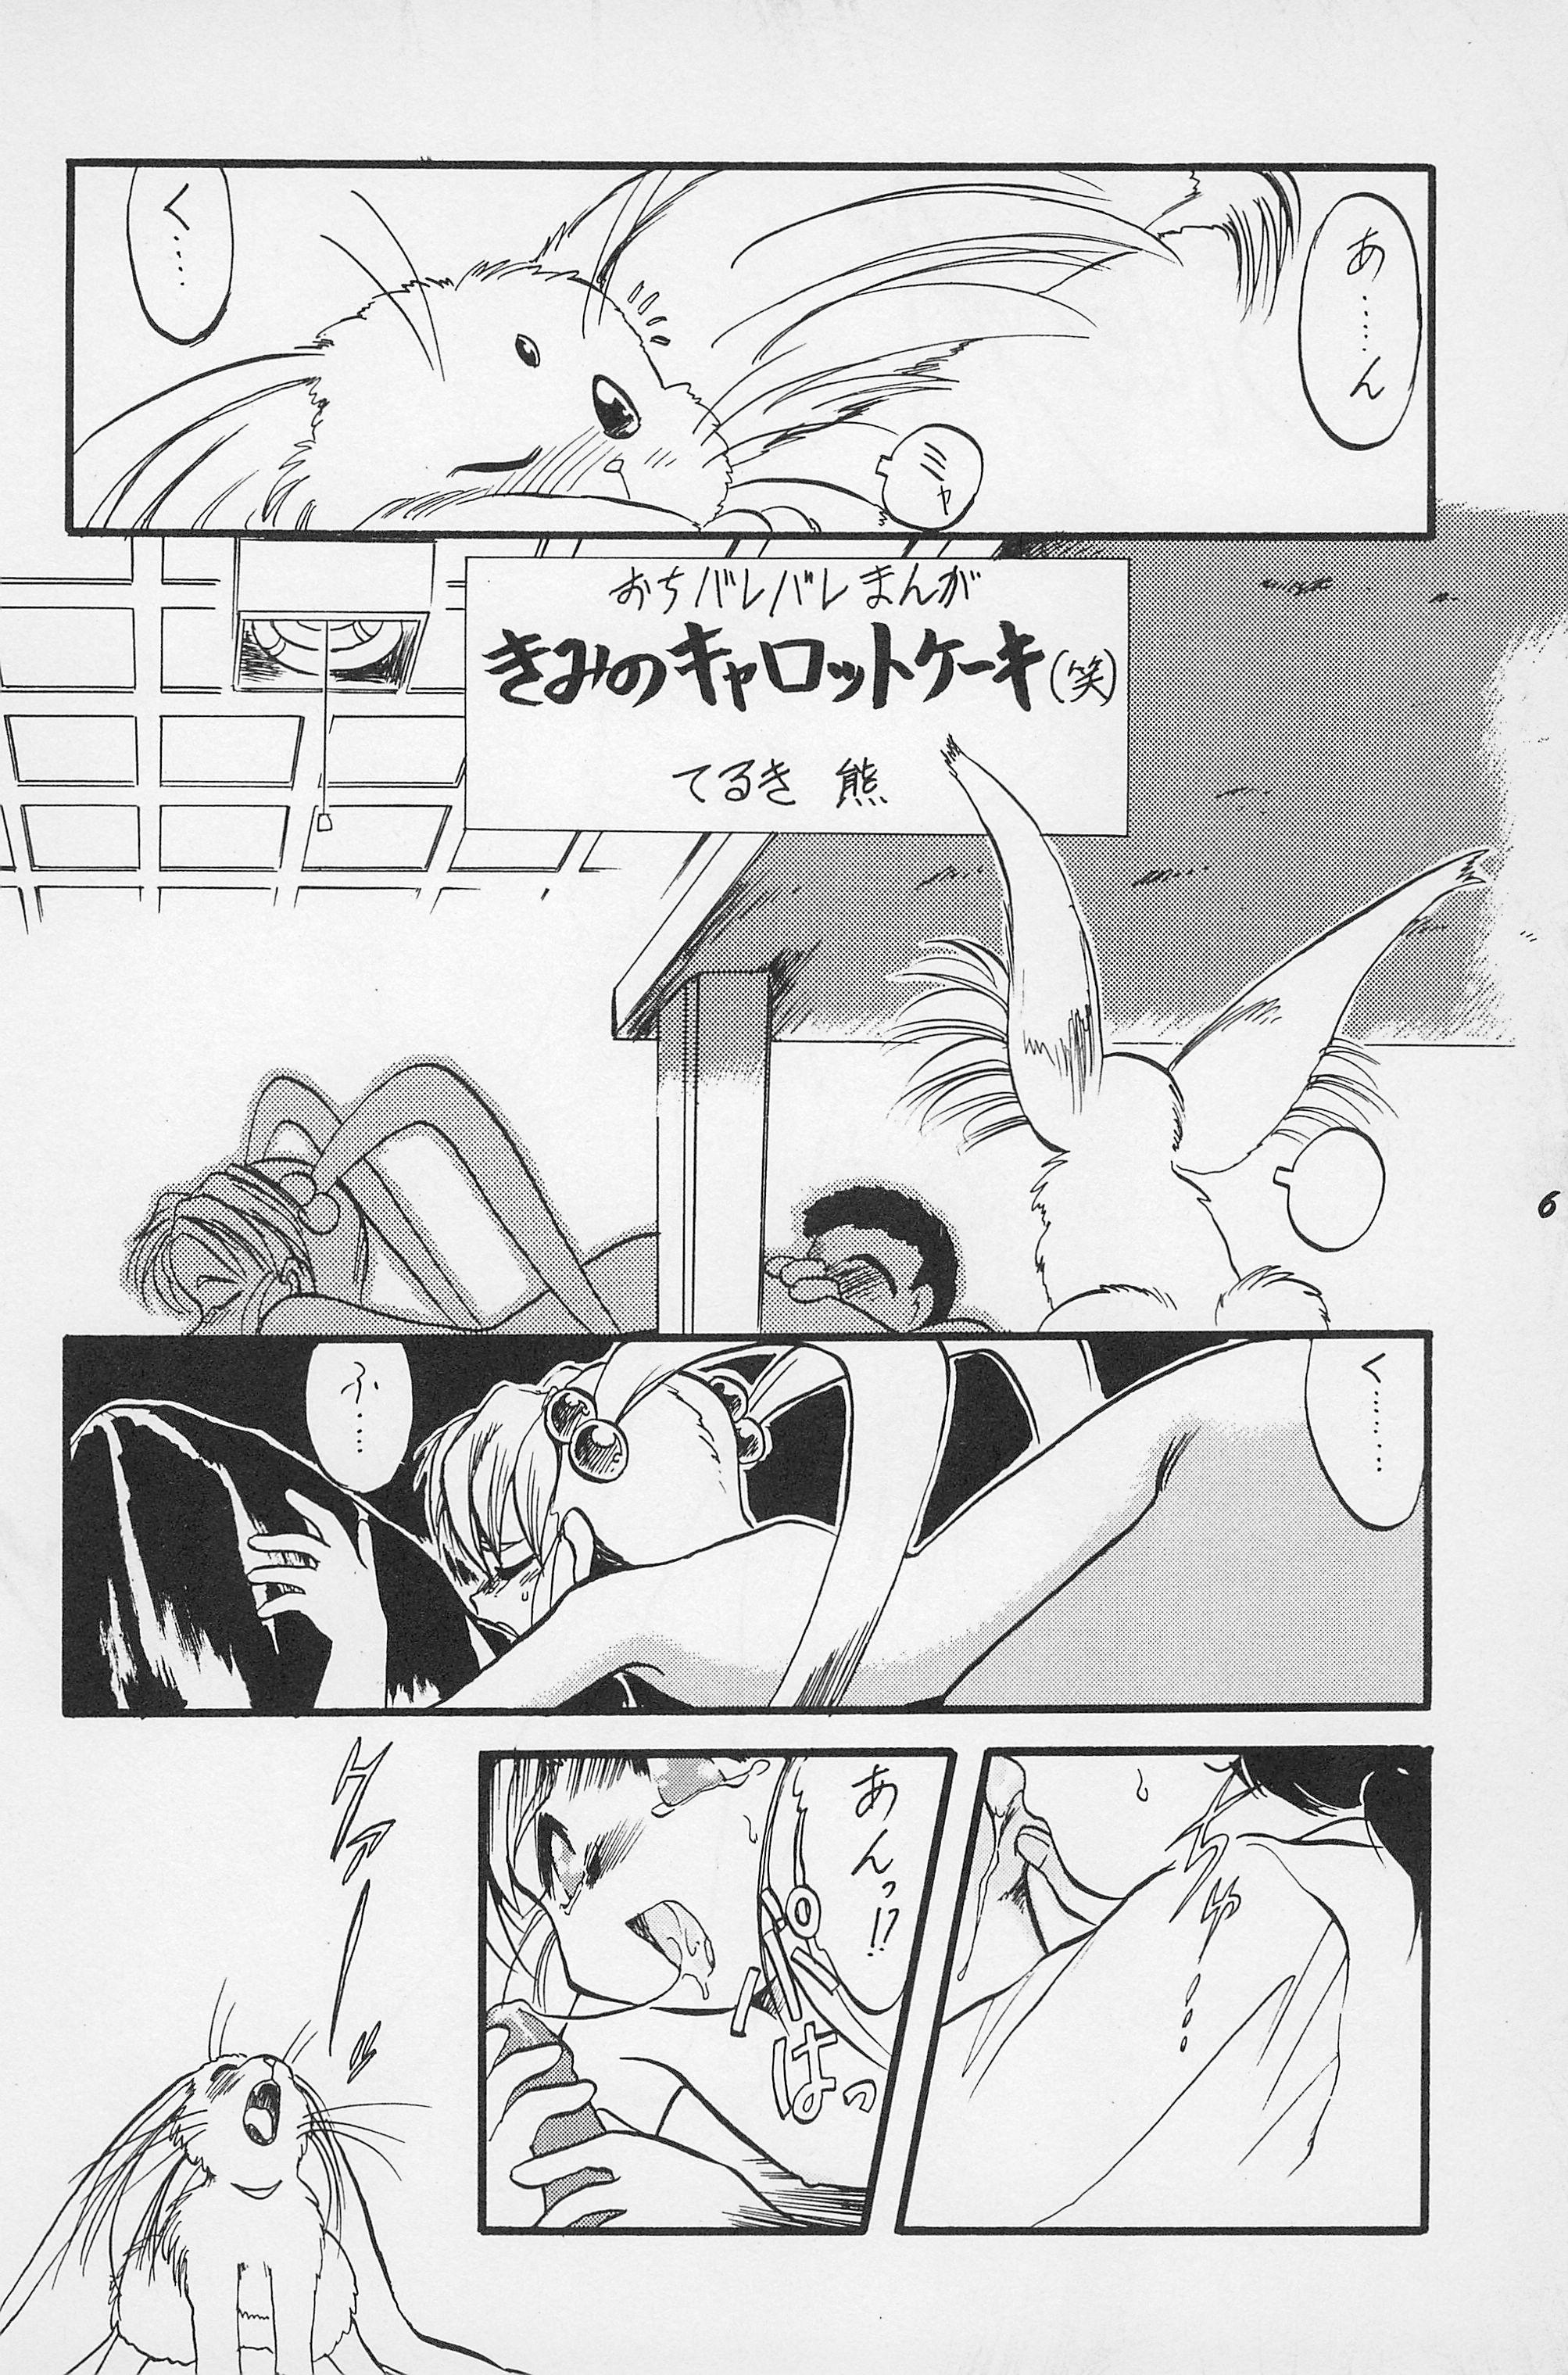 Fuck For Cash Teddy Bear no Omise Vol. 1 - Sailor moon Darkstalkers Tenchi muyo Earthbound Samurai pizza cats Online - Page 8